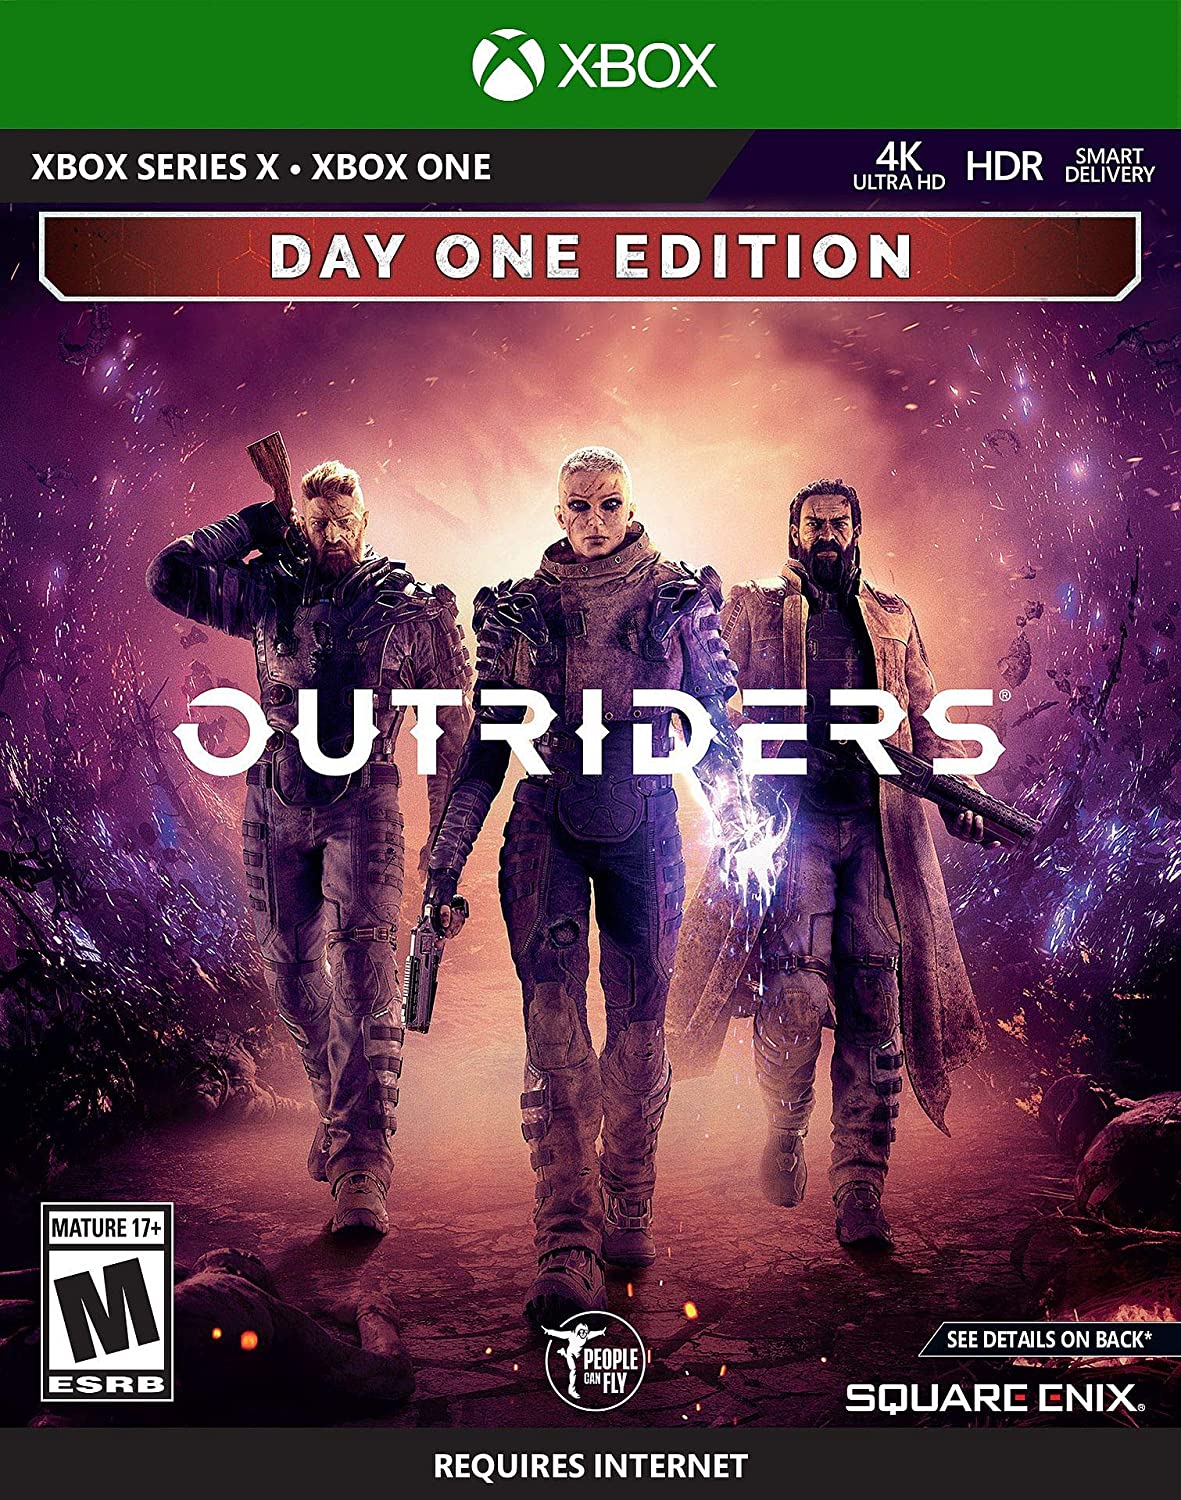 OUTRIDERS DAY ONE EDITION XBOX ONE X|S - Easy Video Game